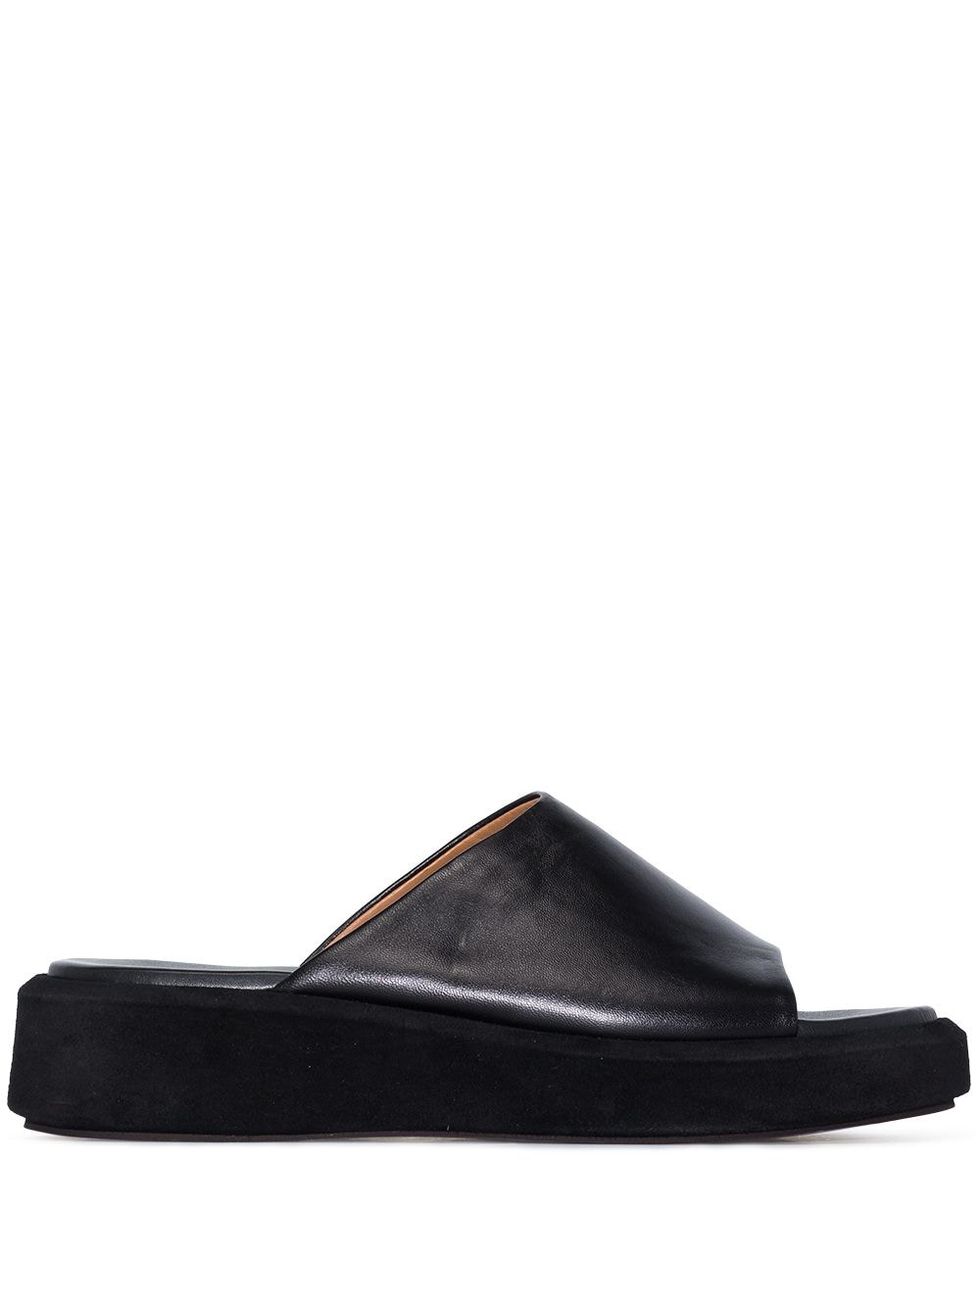 Pacci Leather Sandal